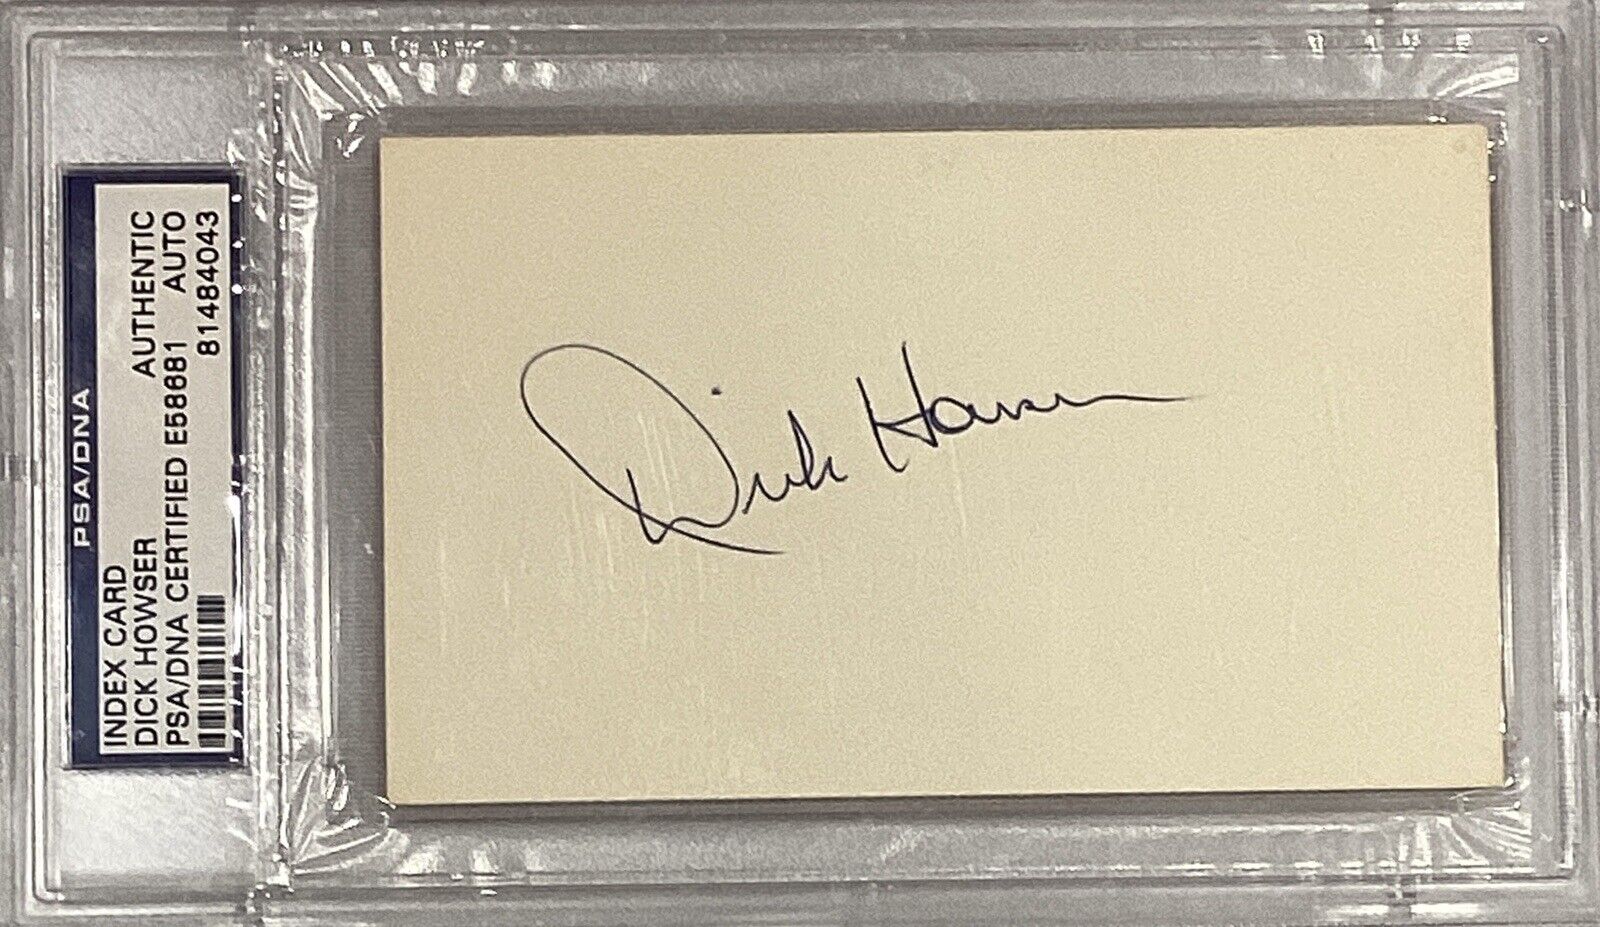 Dick Howser - Signed / Auto / Autographed Cut - Slabbed PSA / DNA -Yanks, Royals